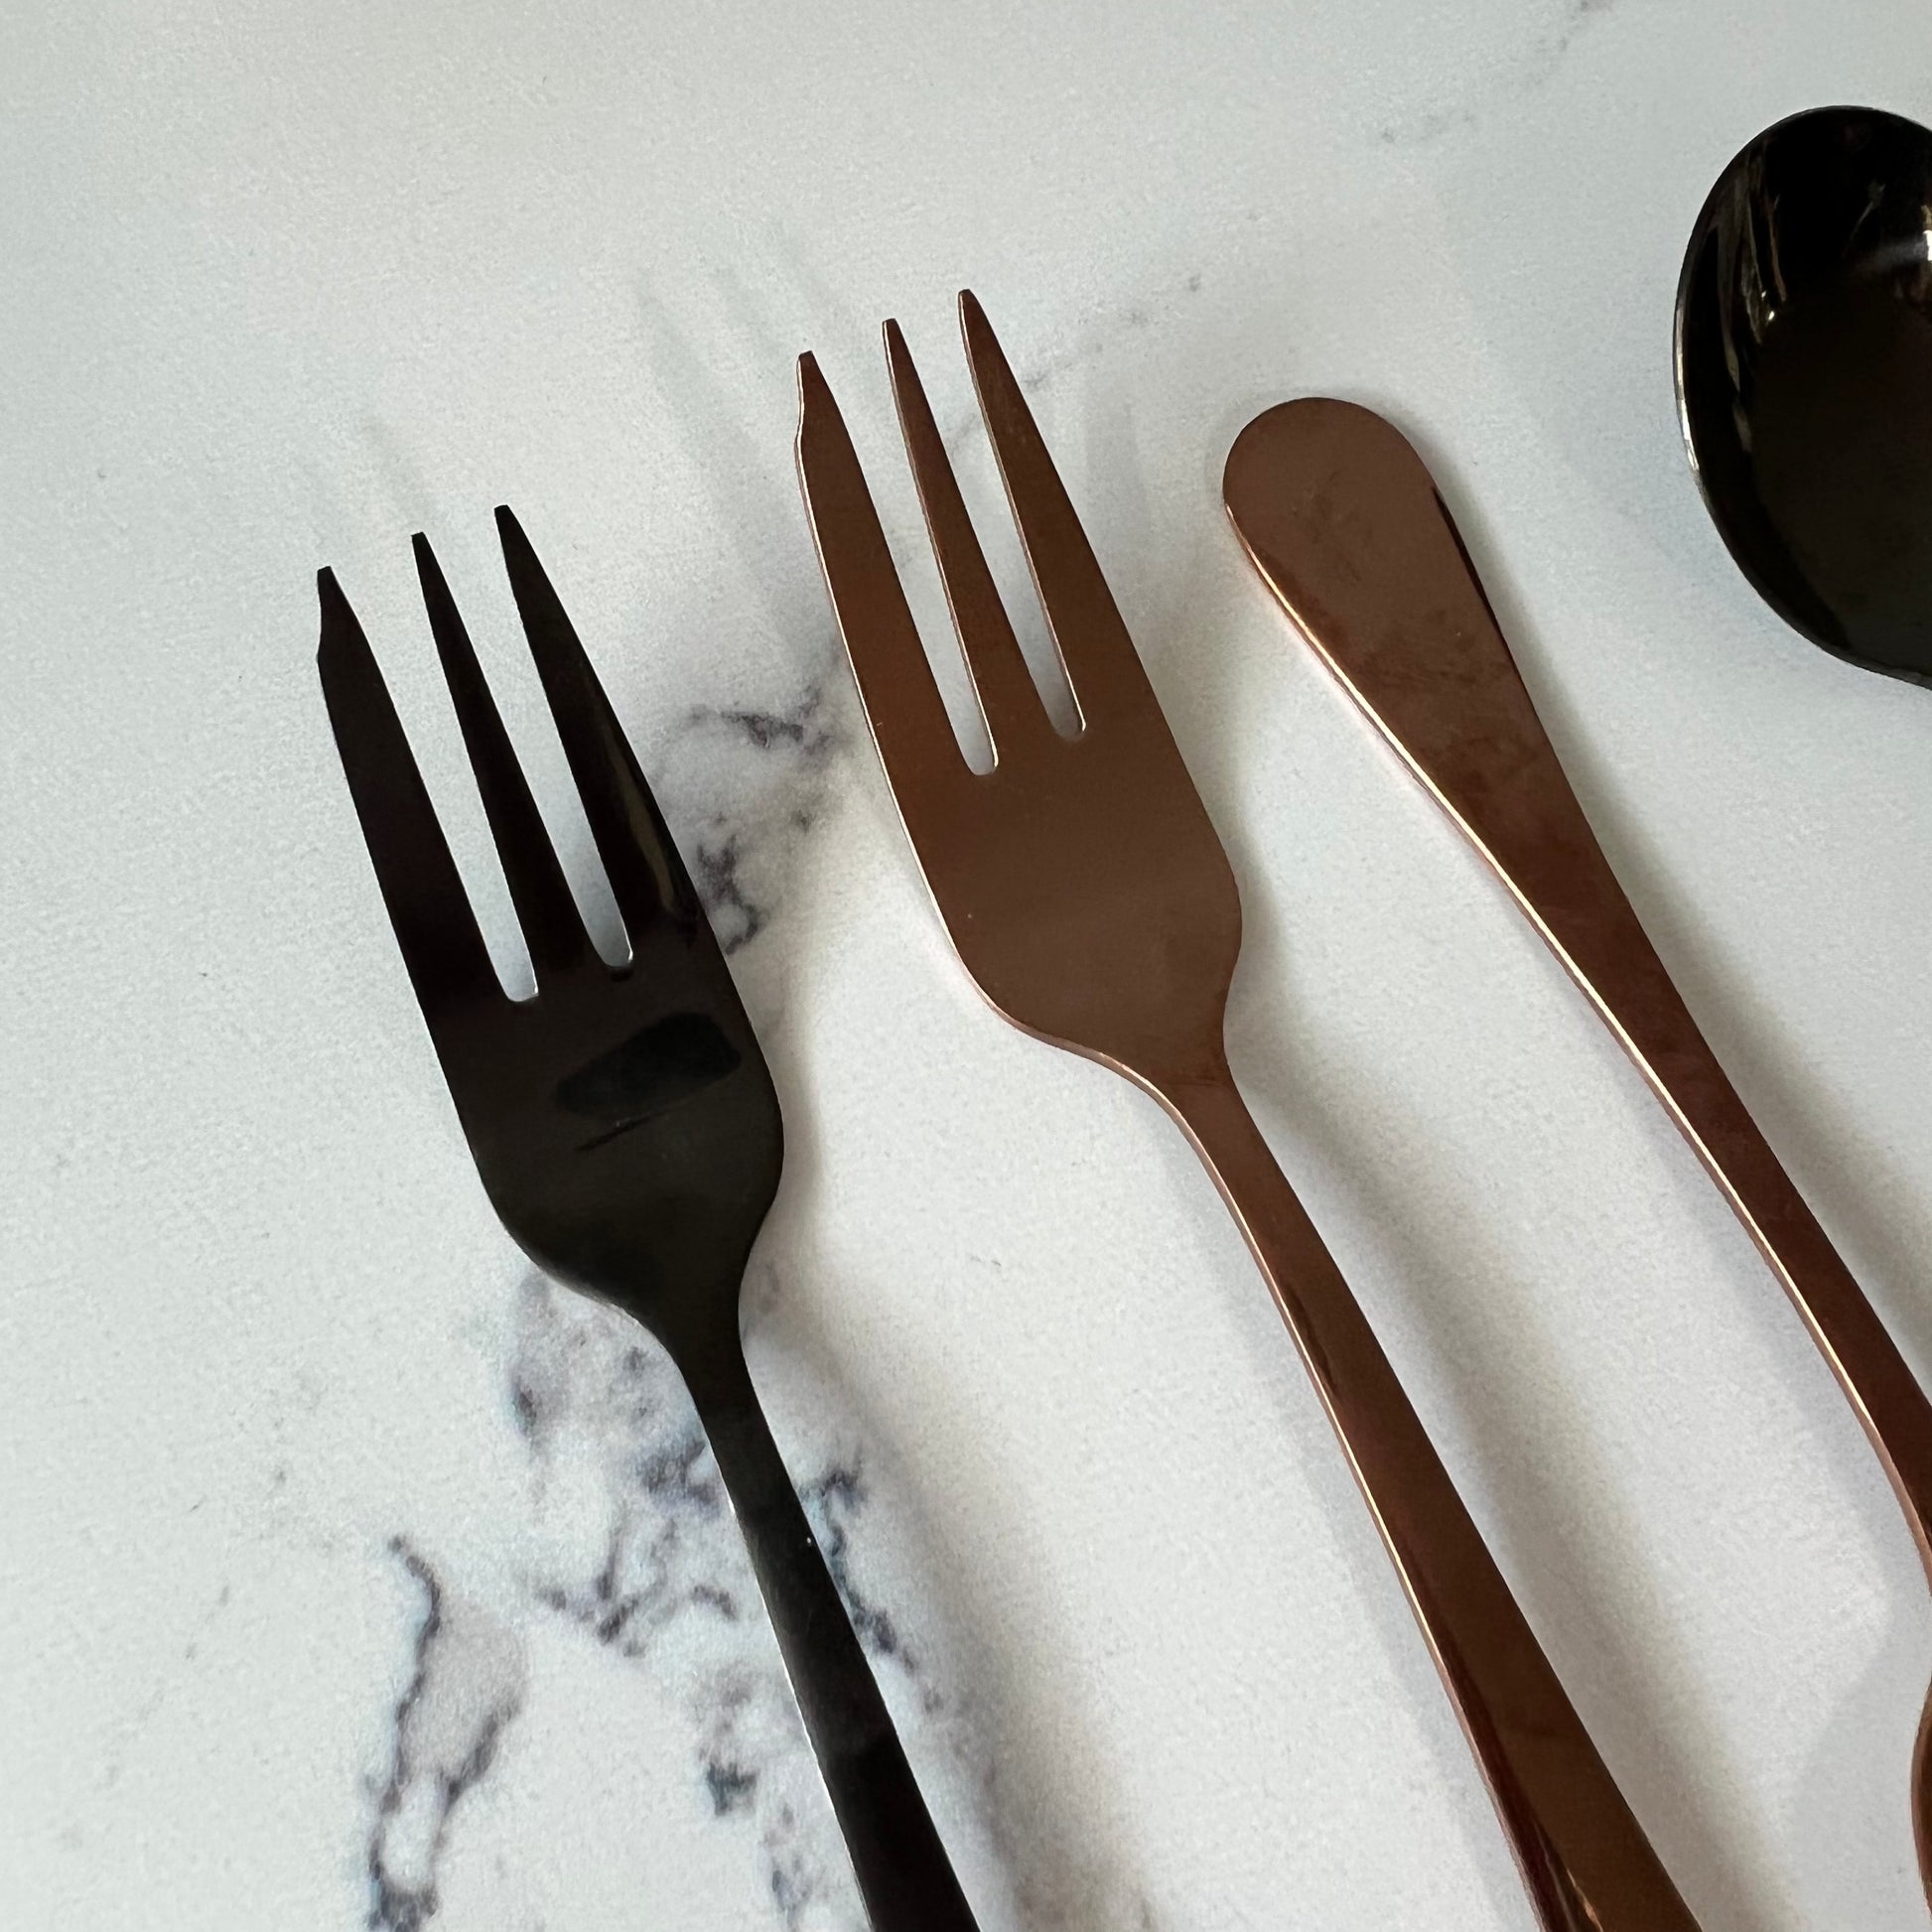 close-up of forks on a marble countertop.